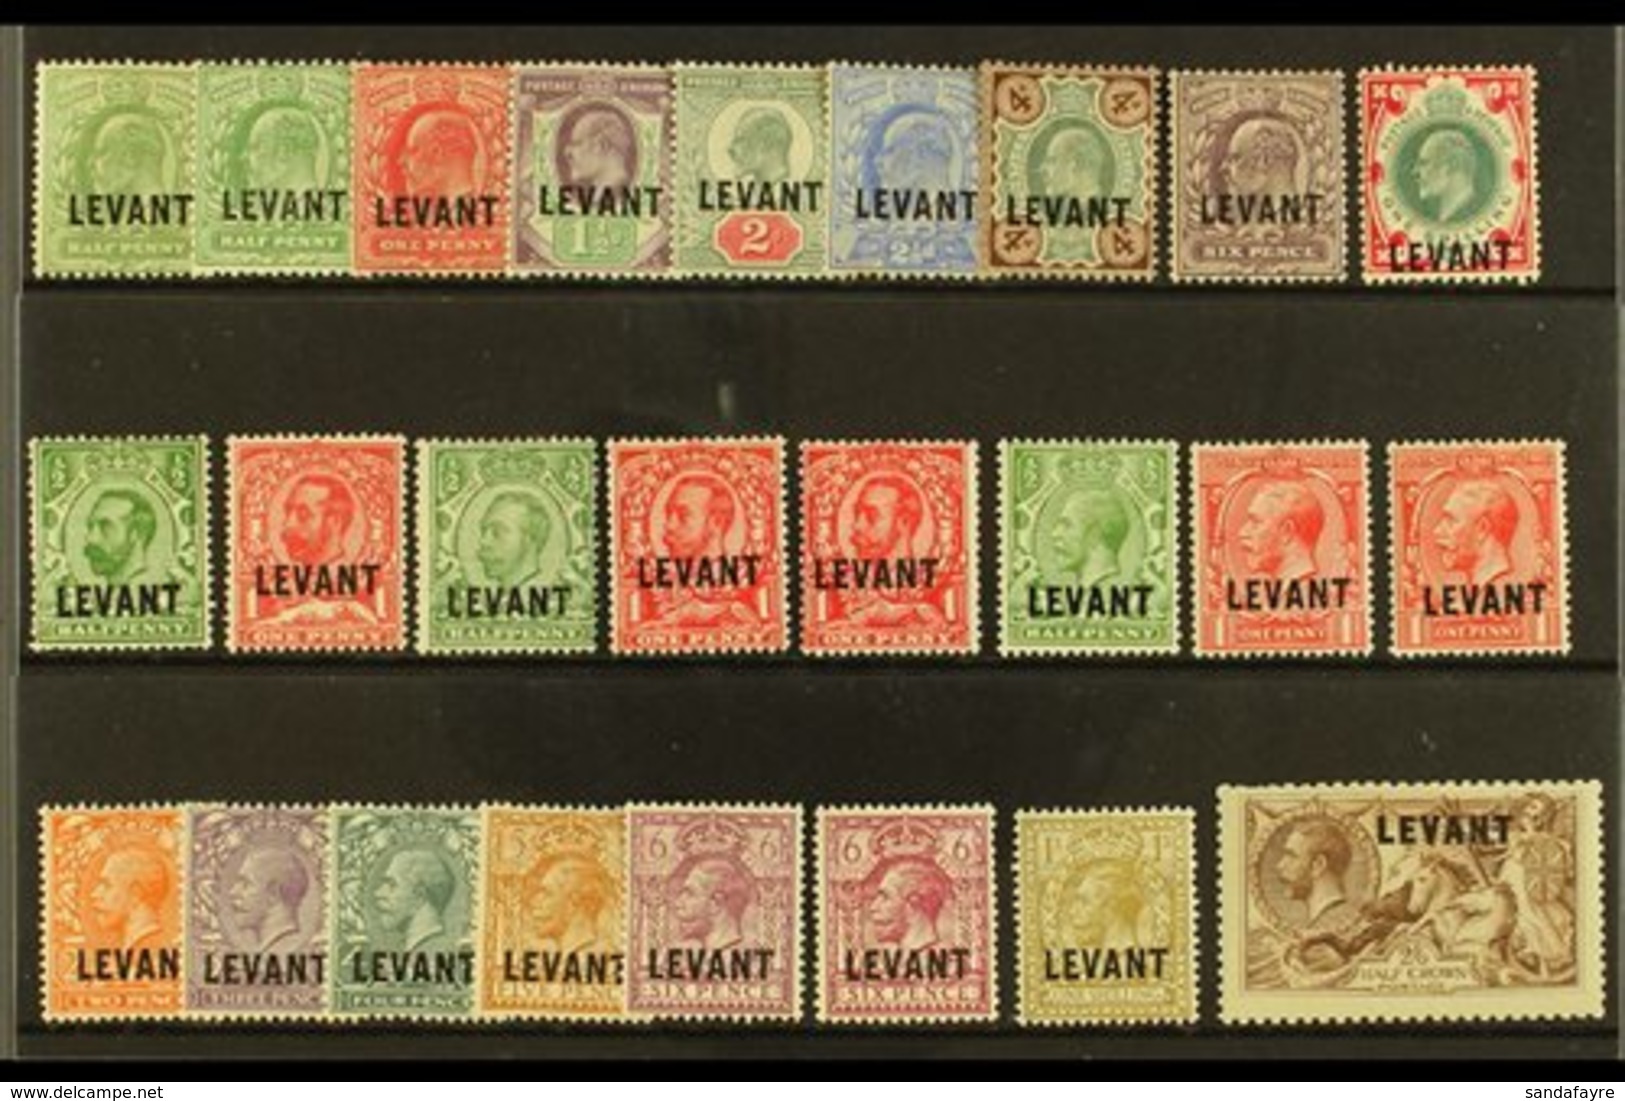 BRITISH CURRENCY 1905-21 MINT COLLECTION. An Attractive, All Different Mint "LEVANT" Opt'd Group That Includes 1905-12 R - British Levant